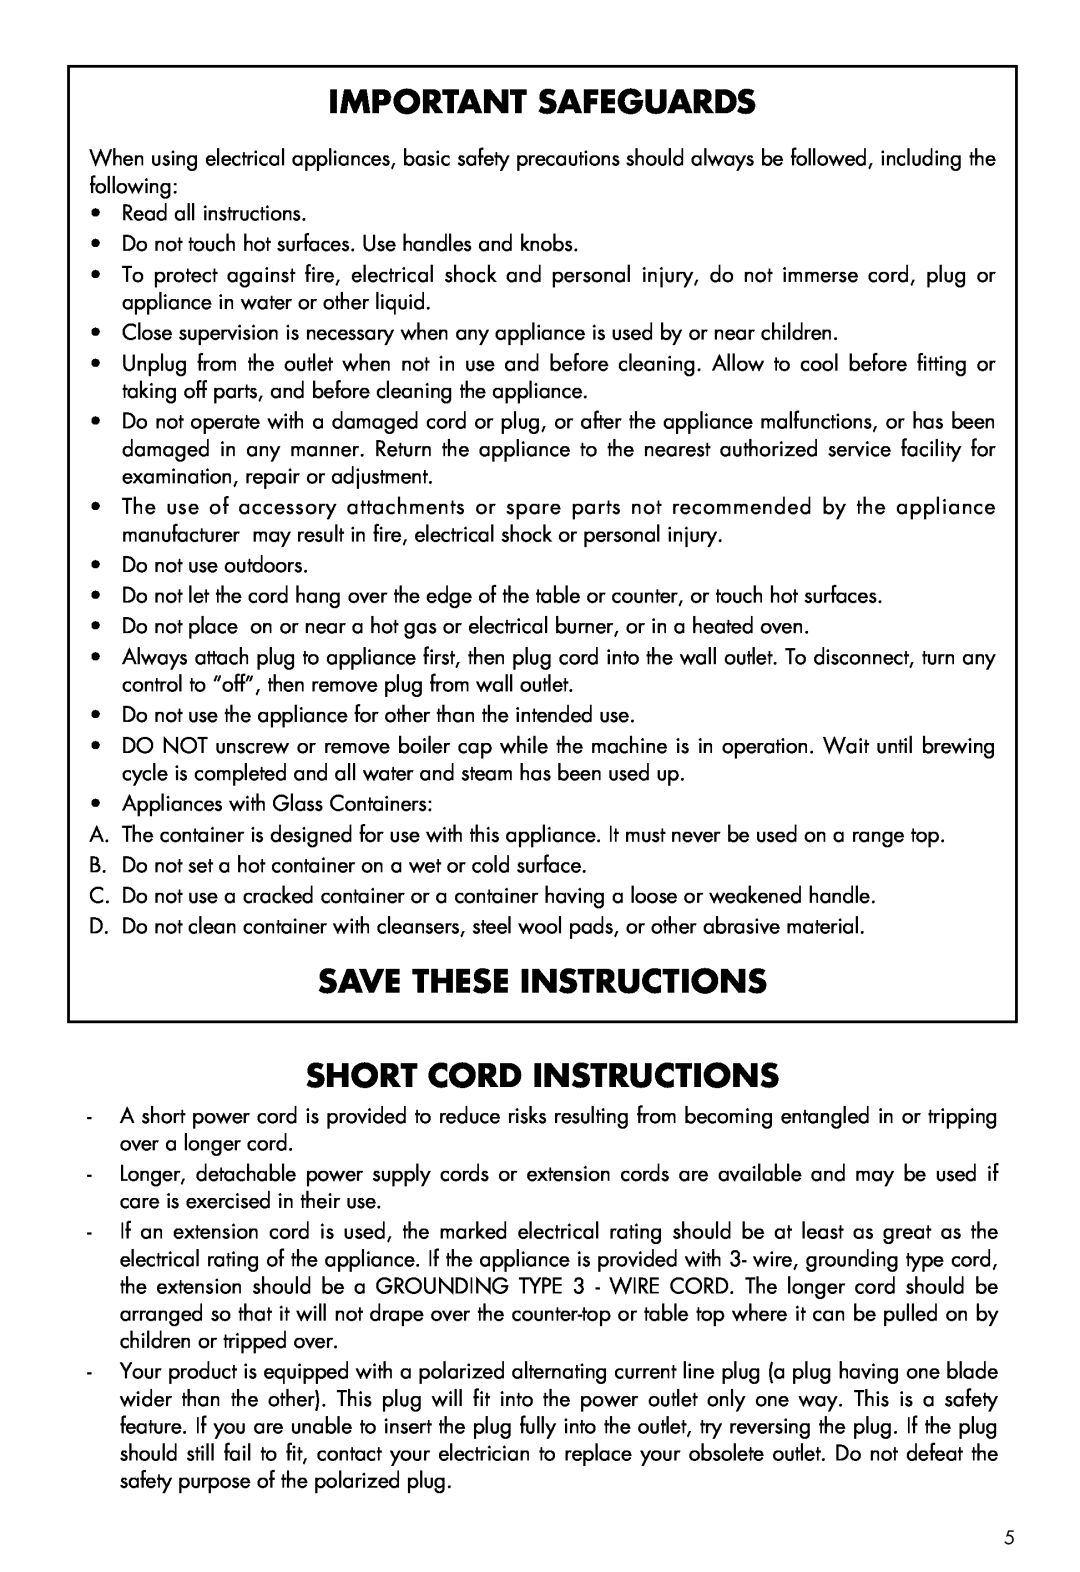 DeLonghi BCO100 manual Important Safeguards, Save These Instructions Short Cord Instructions 